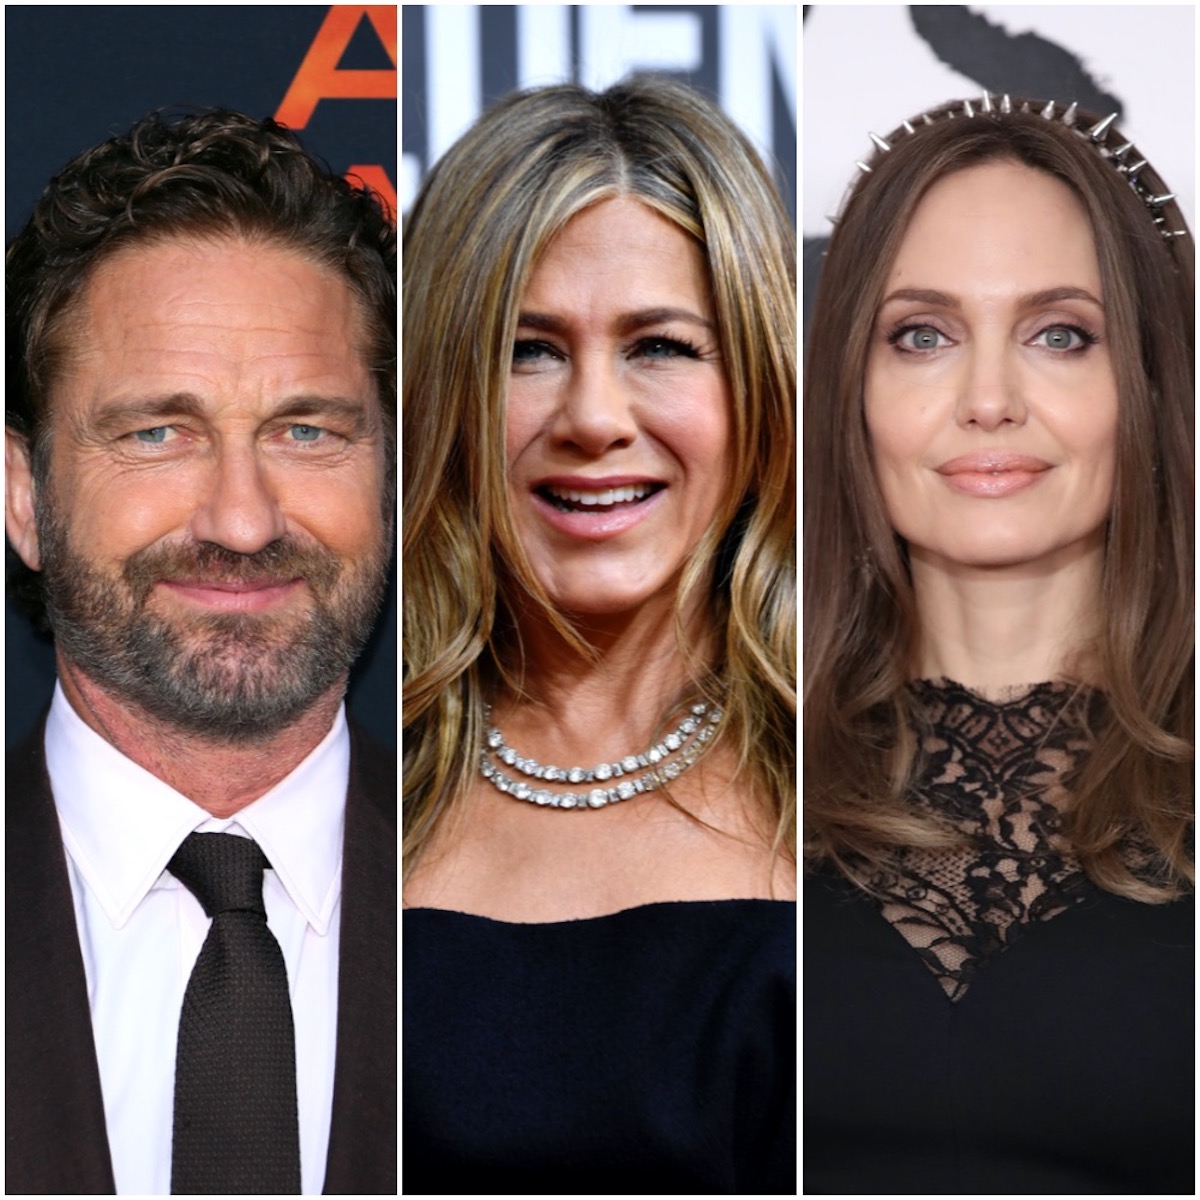 Gerard Butler, Jennifer Aniston, and Angelina Jolie in a photo collage